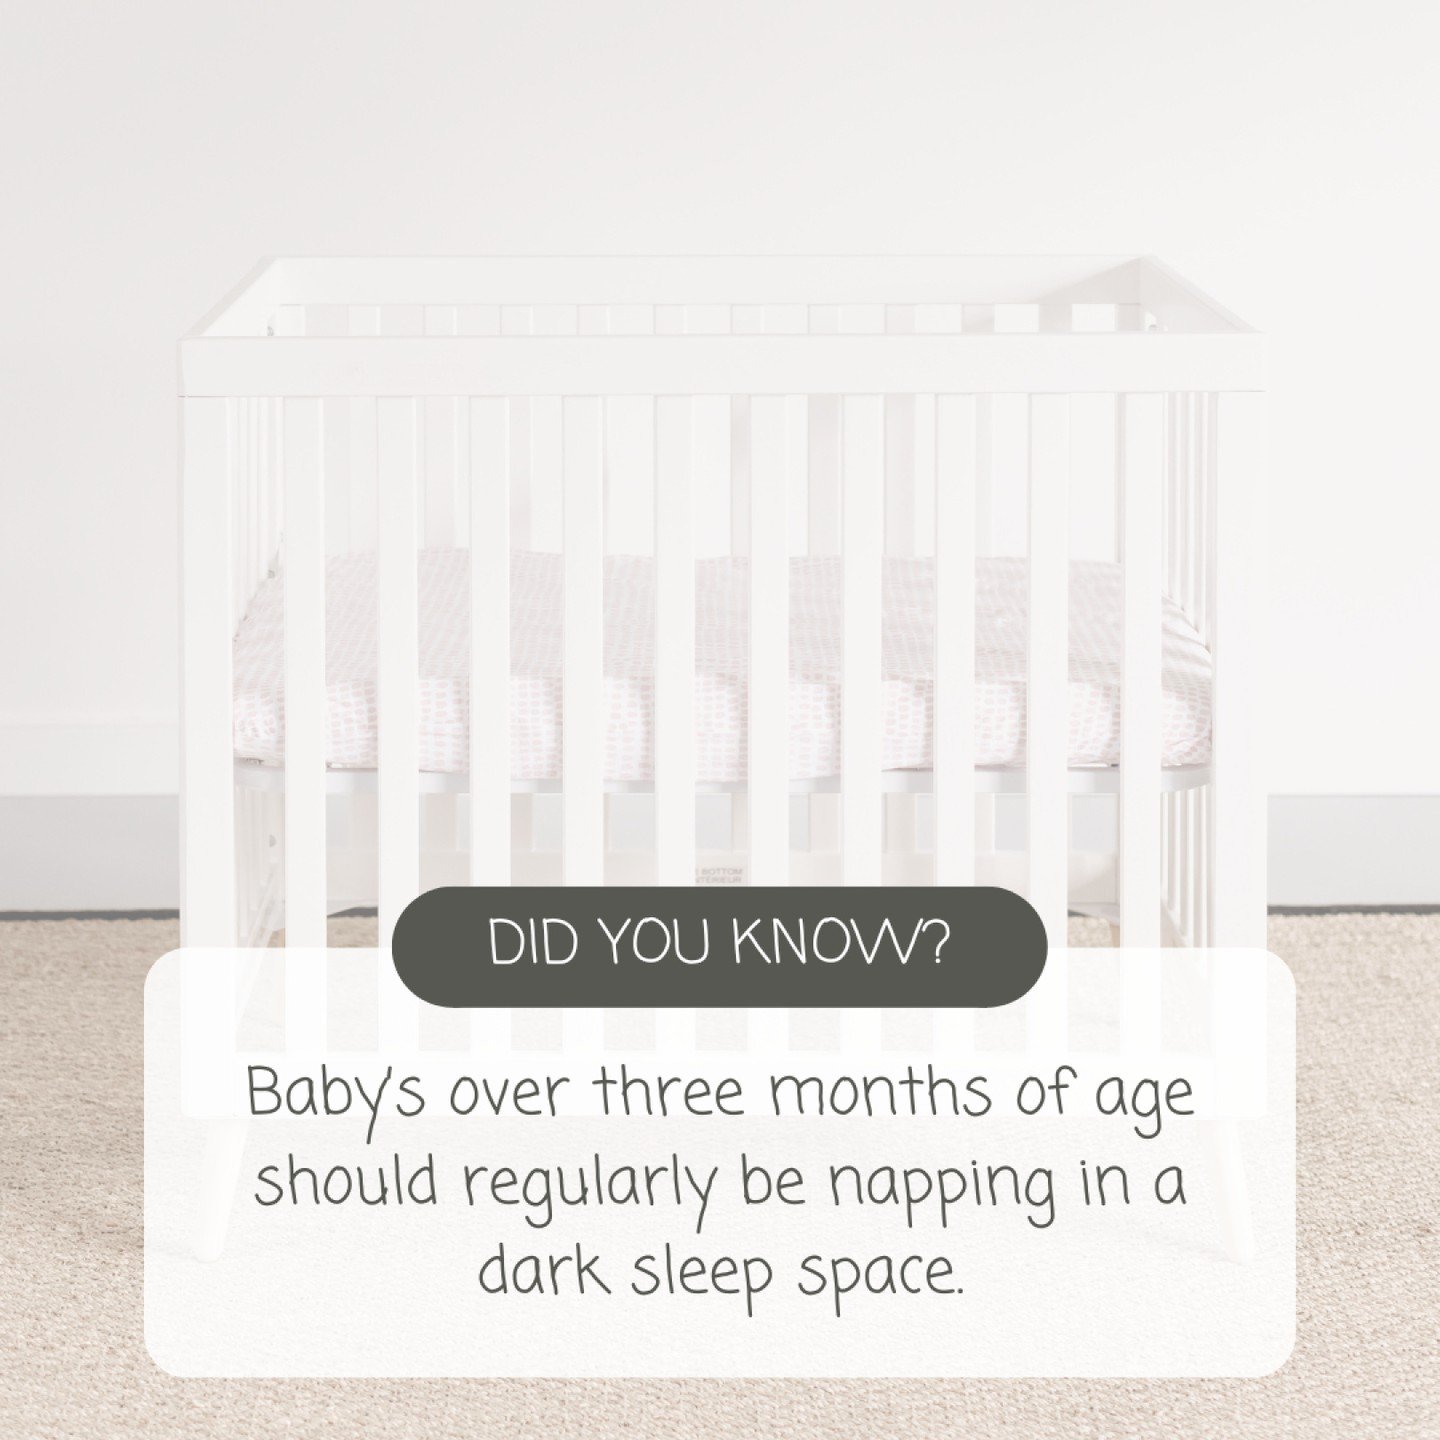 When it comes to newborns, they're pretty adaptable when it comes to napping&mdash;anywhere seems to do the trick! And that flexibility not only works for them but also helps them distinguish between day and night, while ensuring they don't snooze th